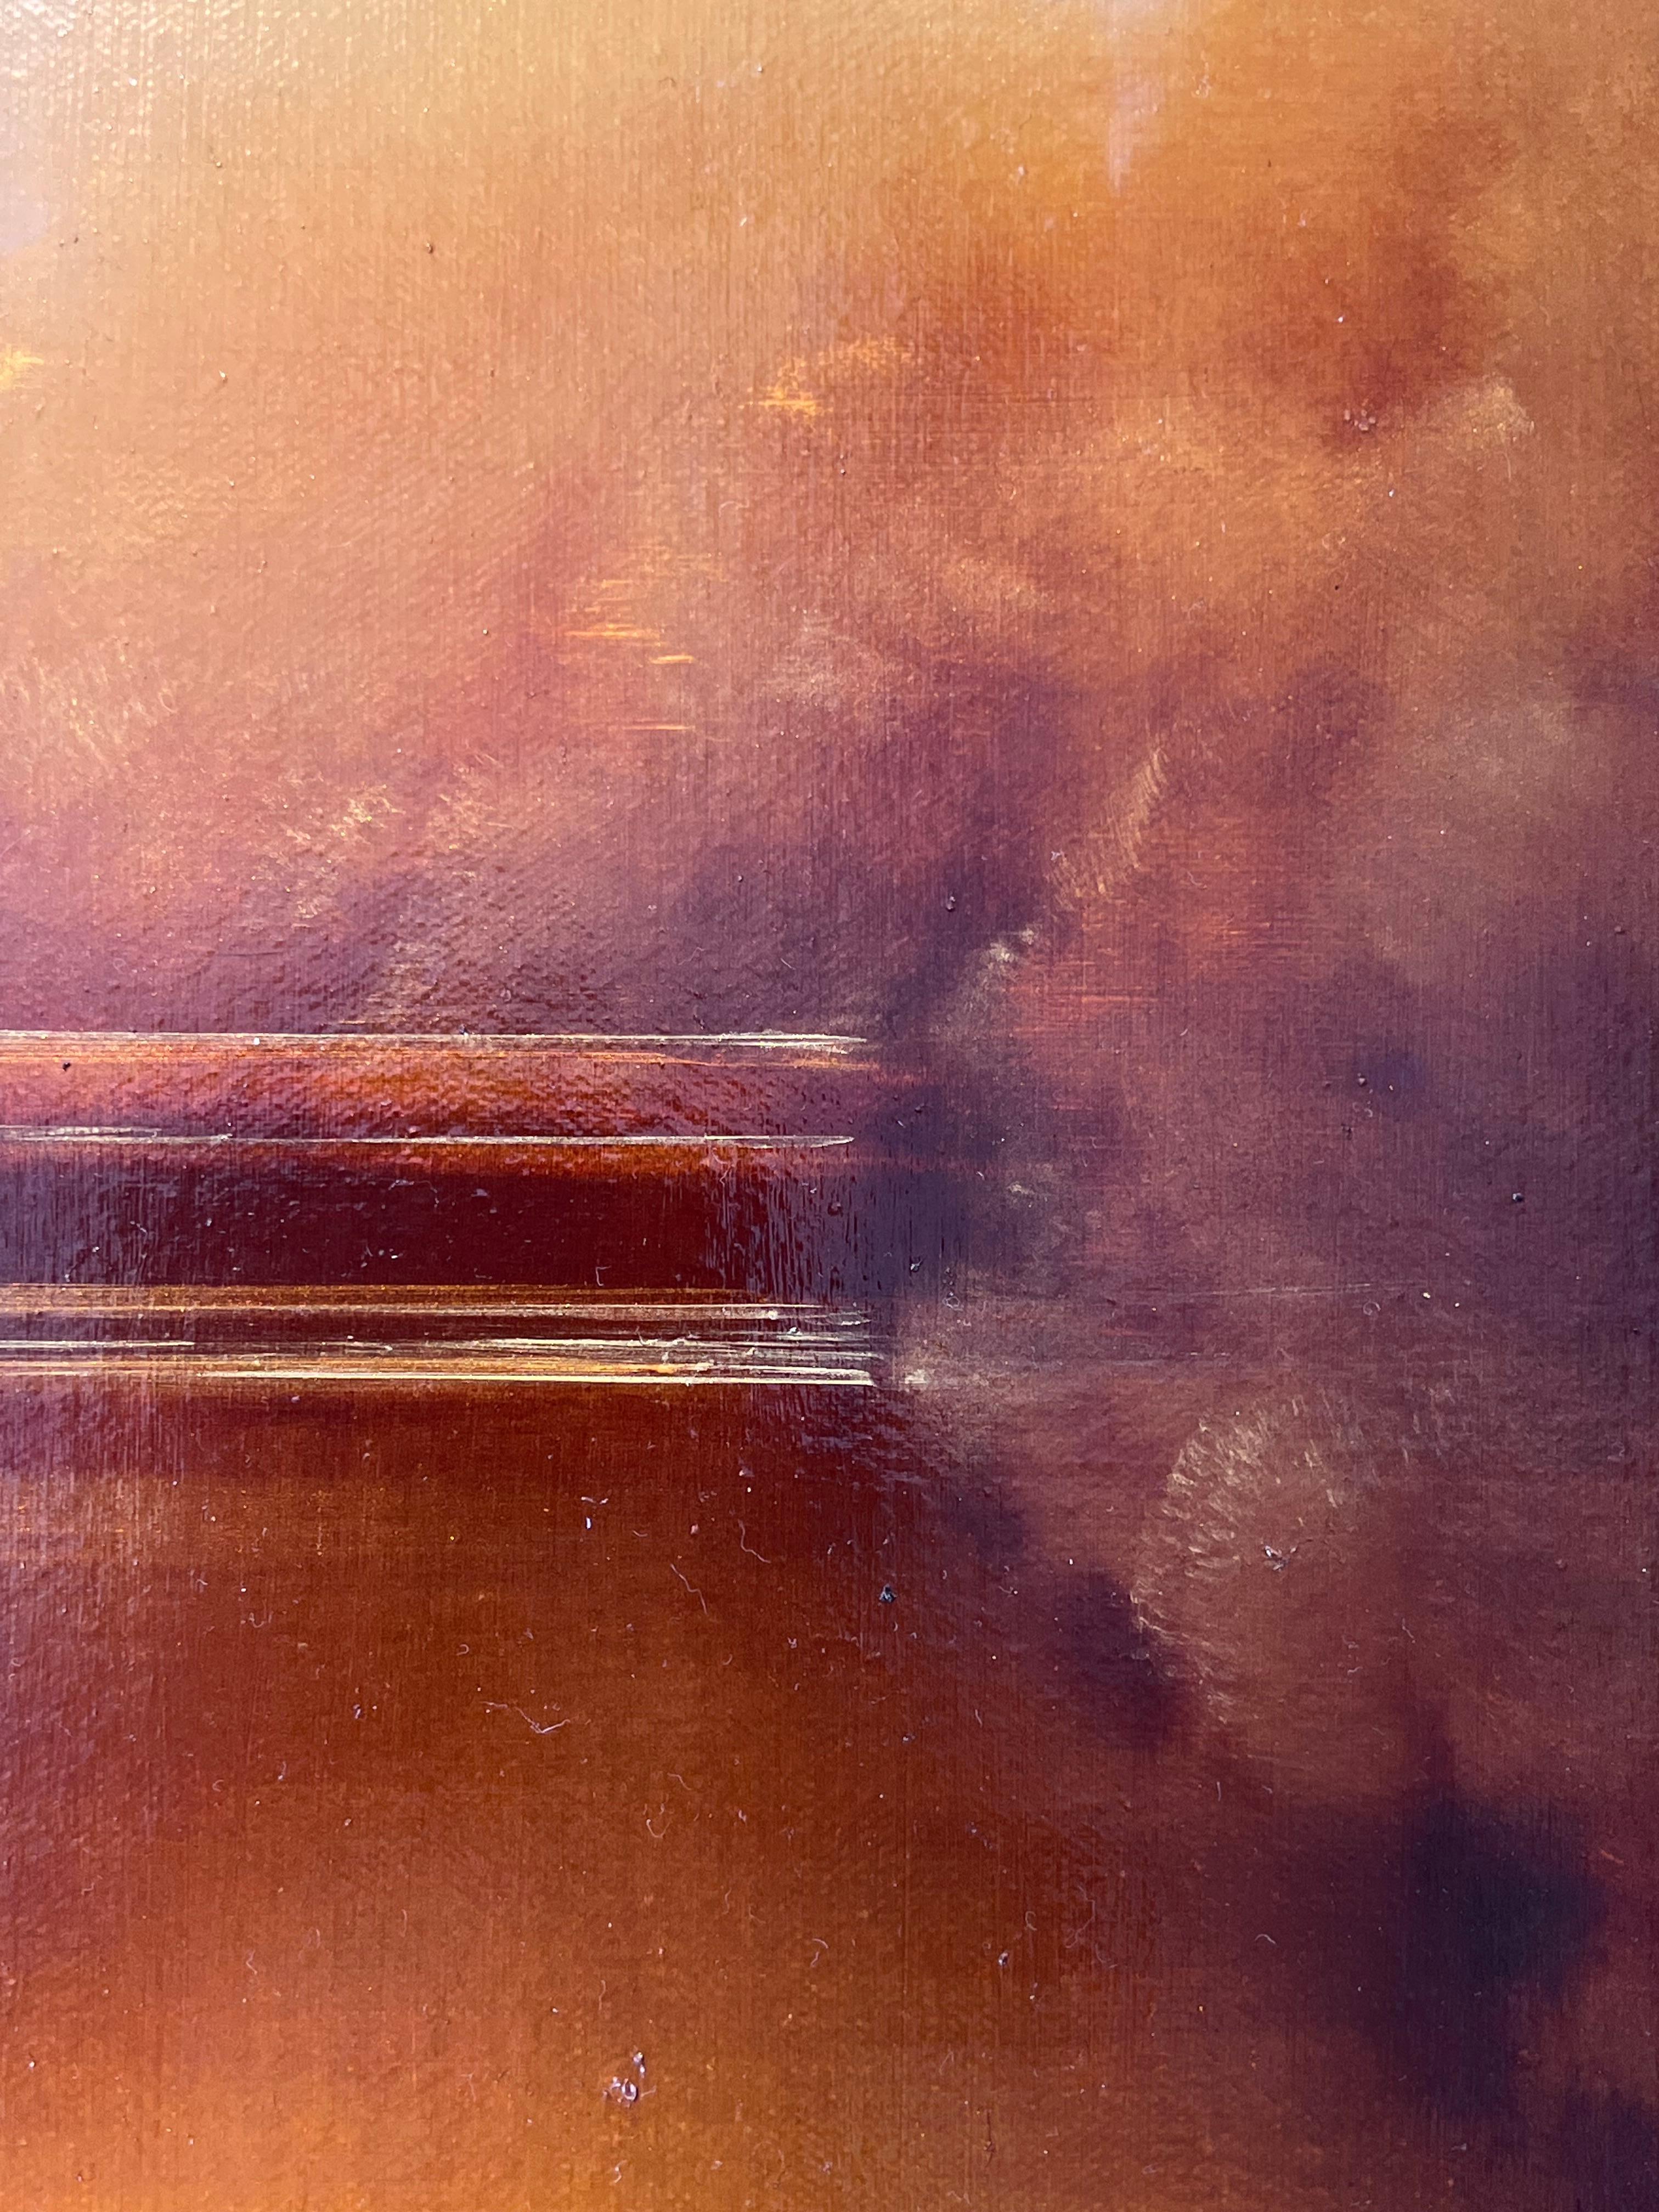 Sienna Evening Reflection-original Abstract landscape painting-Contemporary art - Brown Landscape Painting by Louse Fairchild